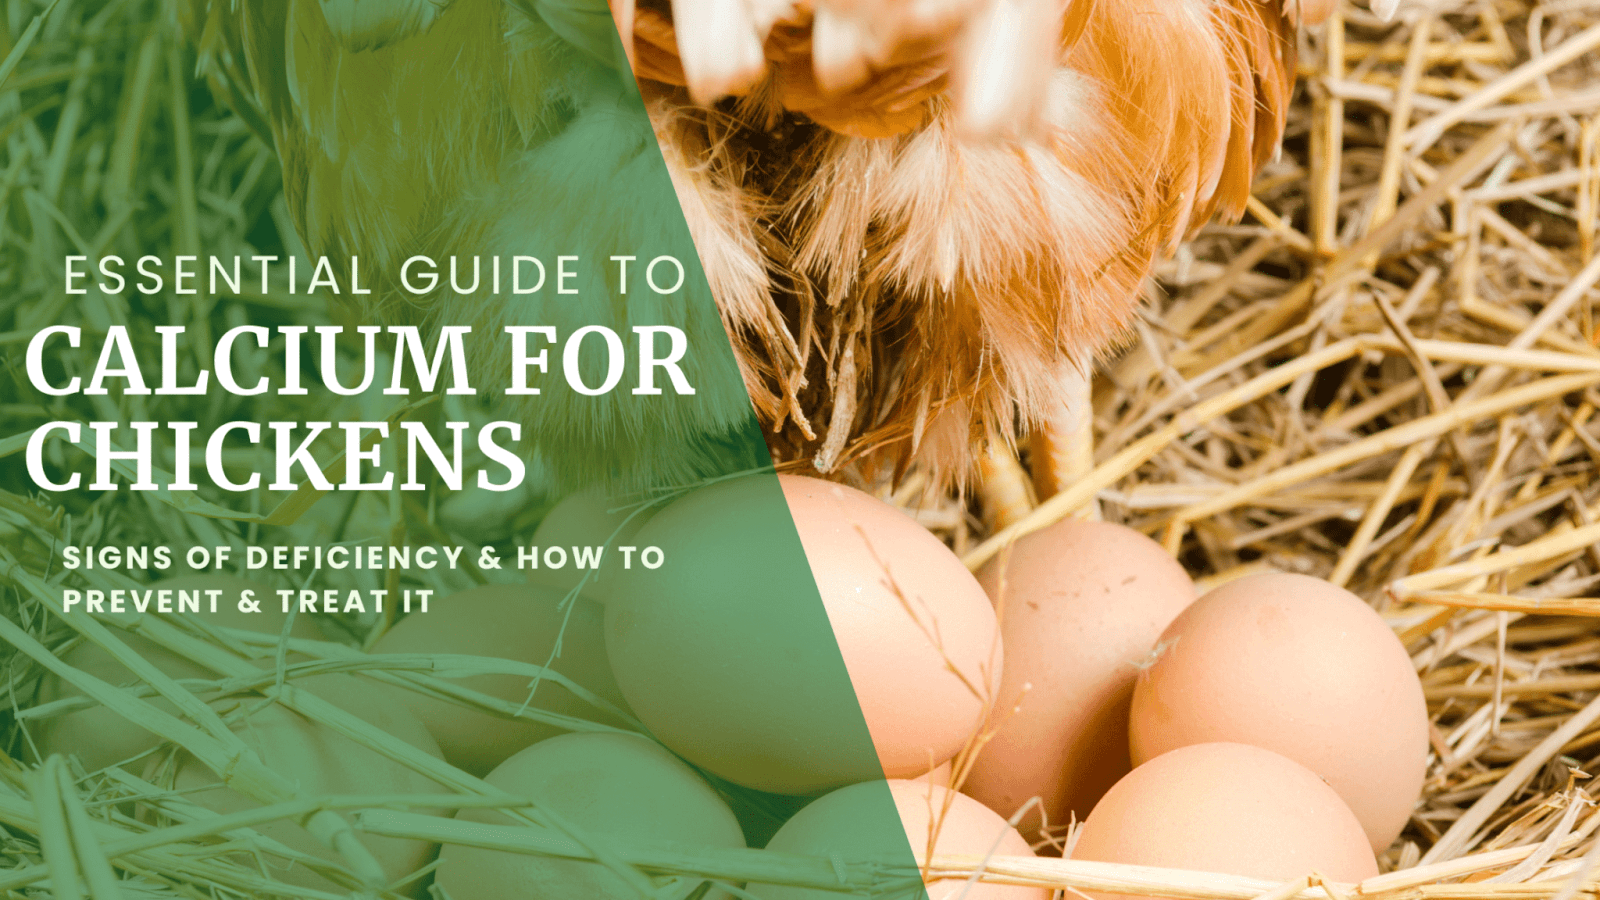 Essential Guide to Calcium for Chickens